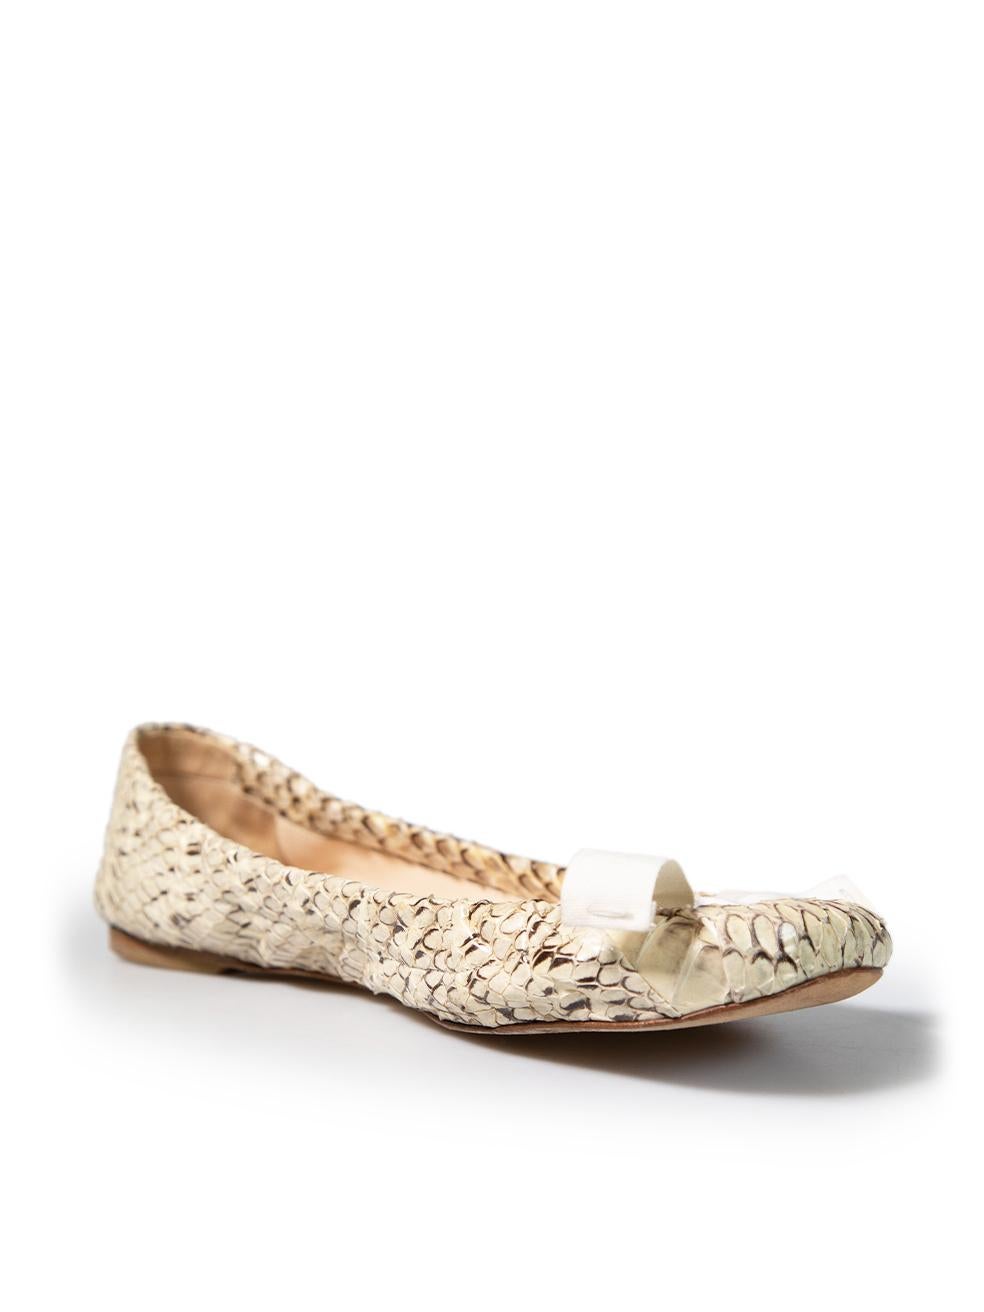 CONDITION is Good. Minor wear to the ballet flats is evident. Light wear to the insoles, soles and the top bow detailing is seen with some discolouration marks on this used Prada designer resale item.
 
 
 
 Details
 
 
 Beige
 
 Snakeskin
 
 Ballet